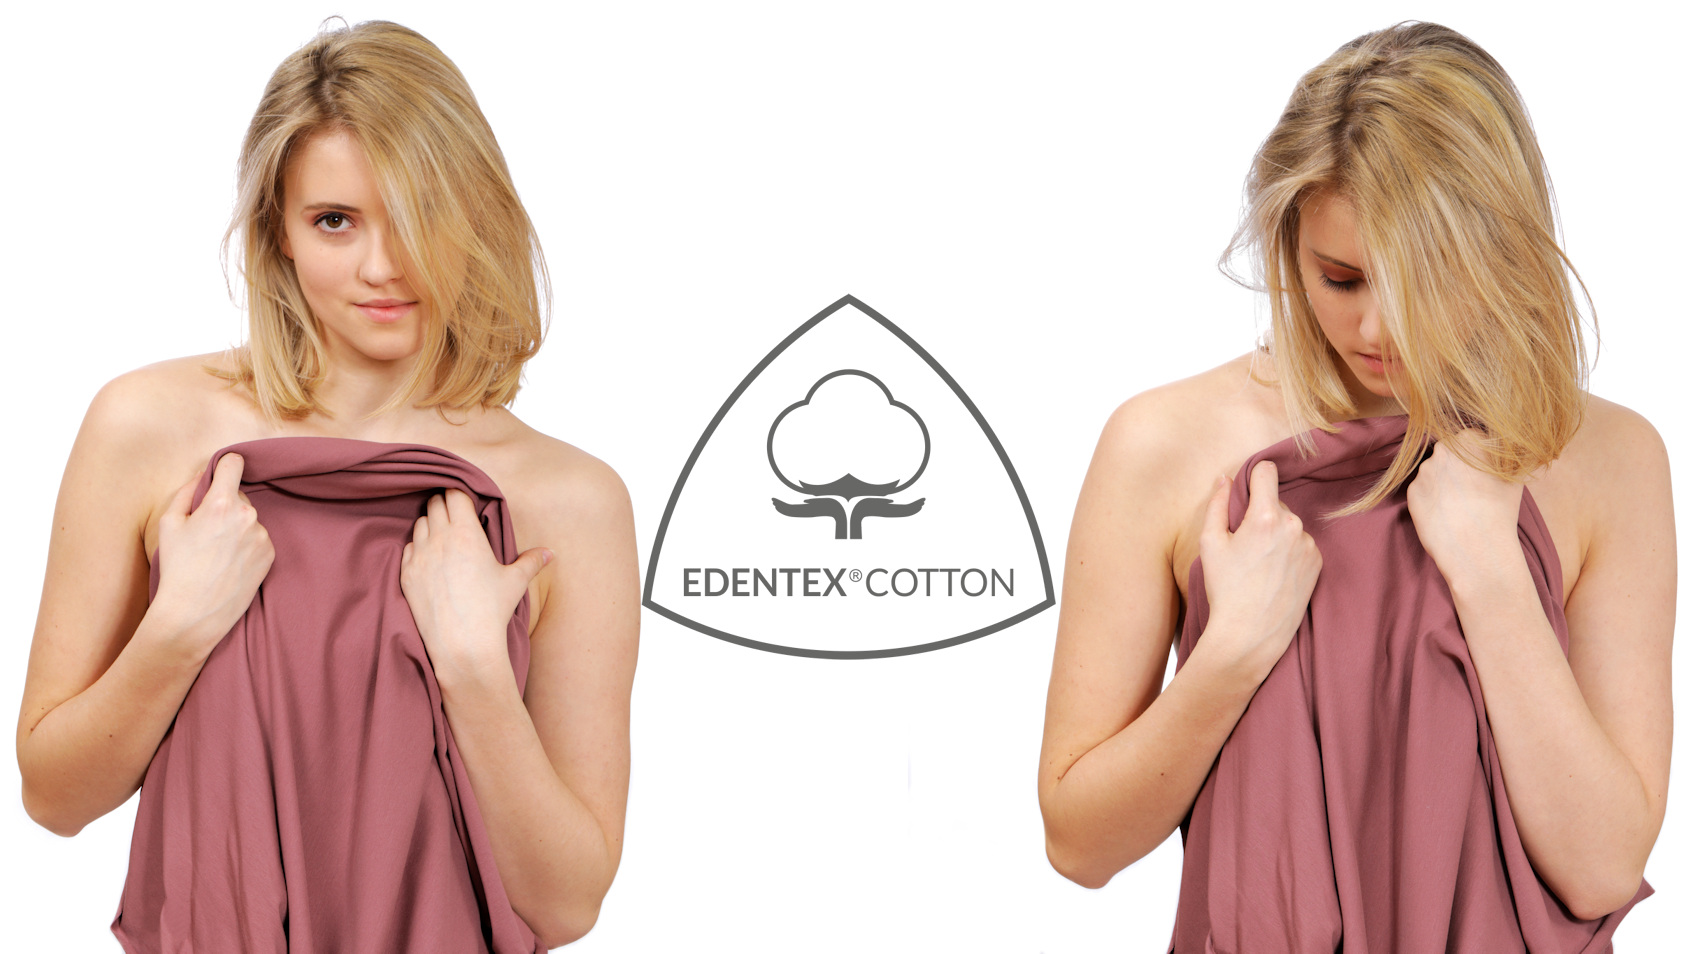 EDENTEX® fabrics mean added value to finished textiles and a growth of customers’ satisfaction